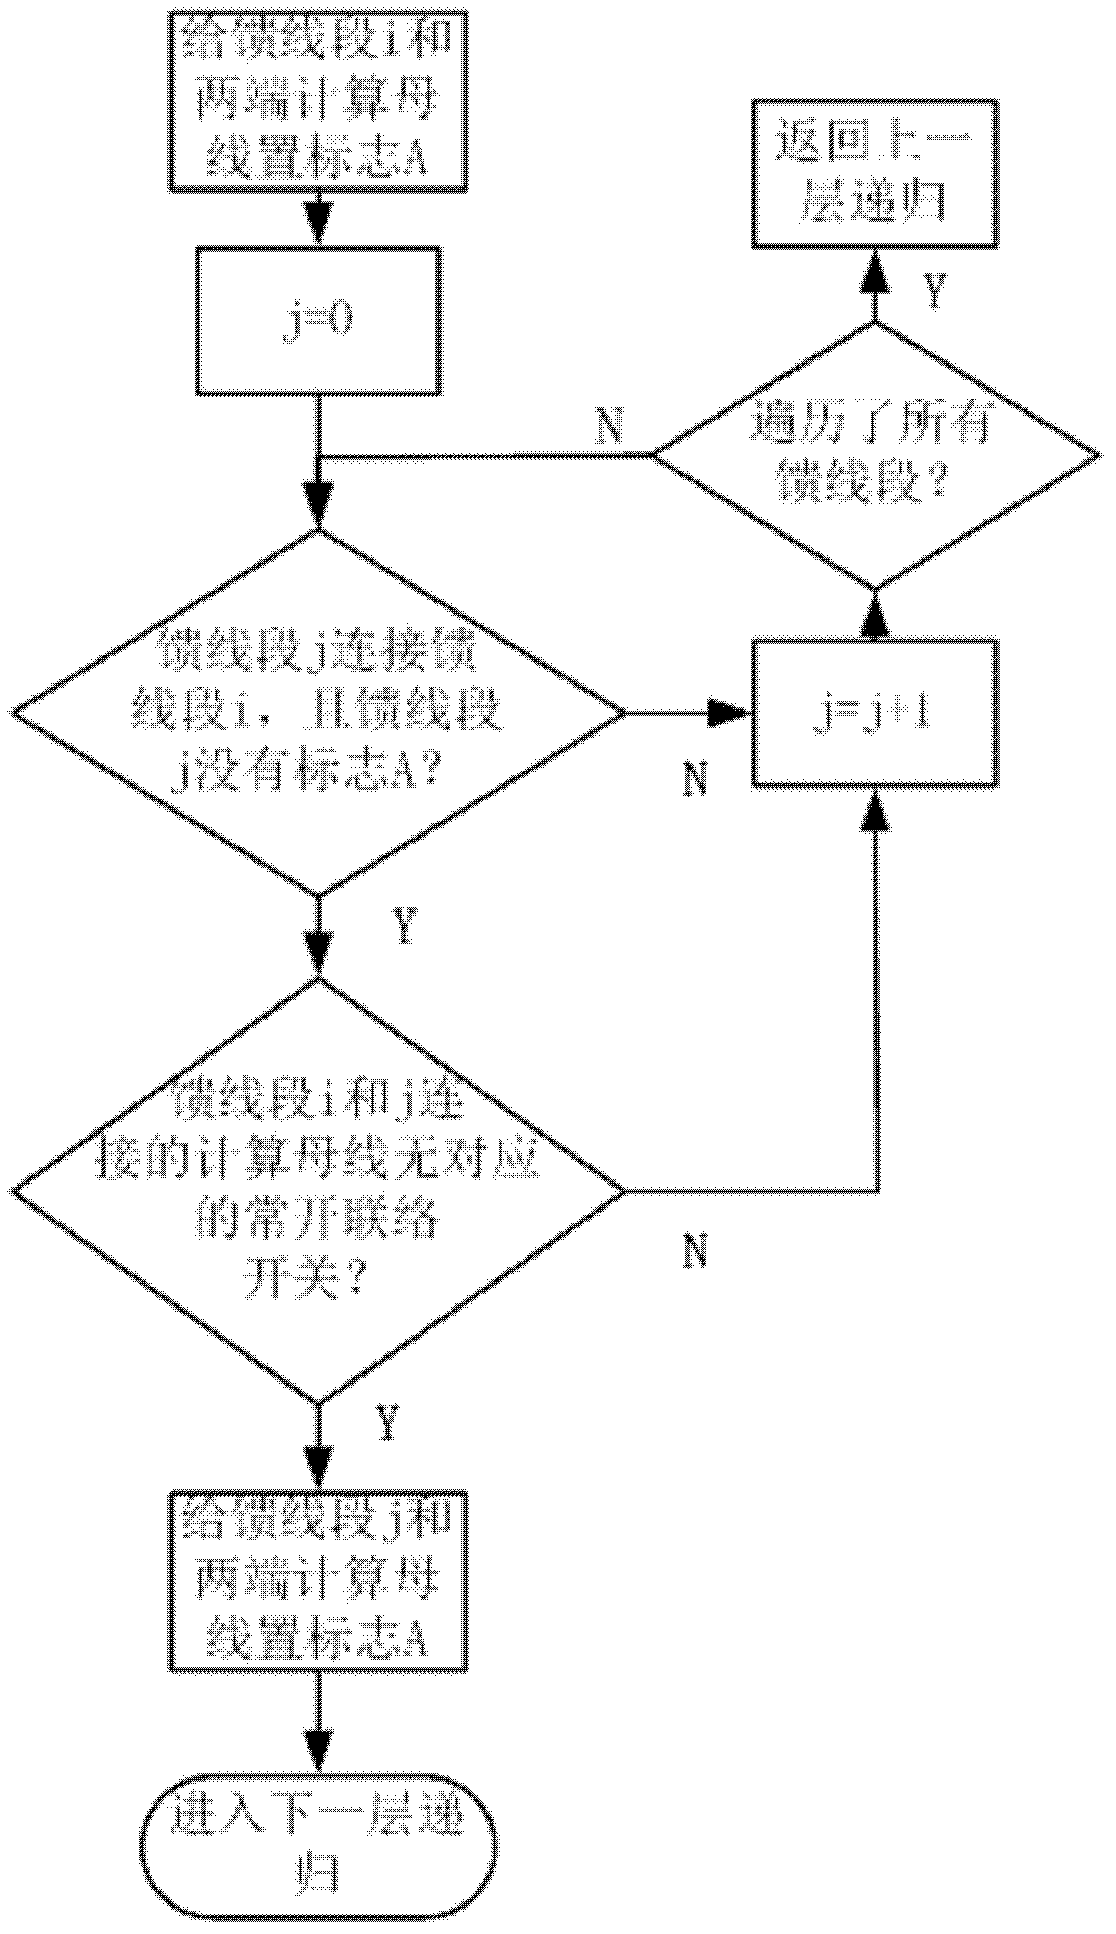 State labeling method for estimating reliability of distribution network